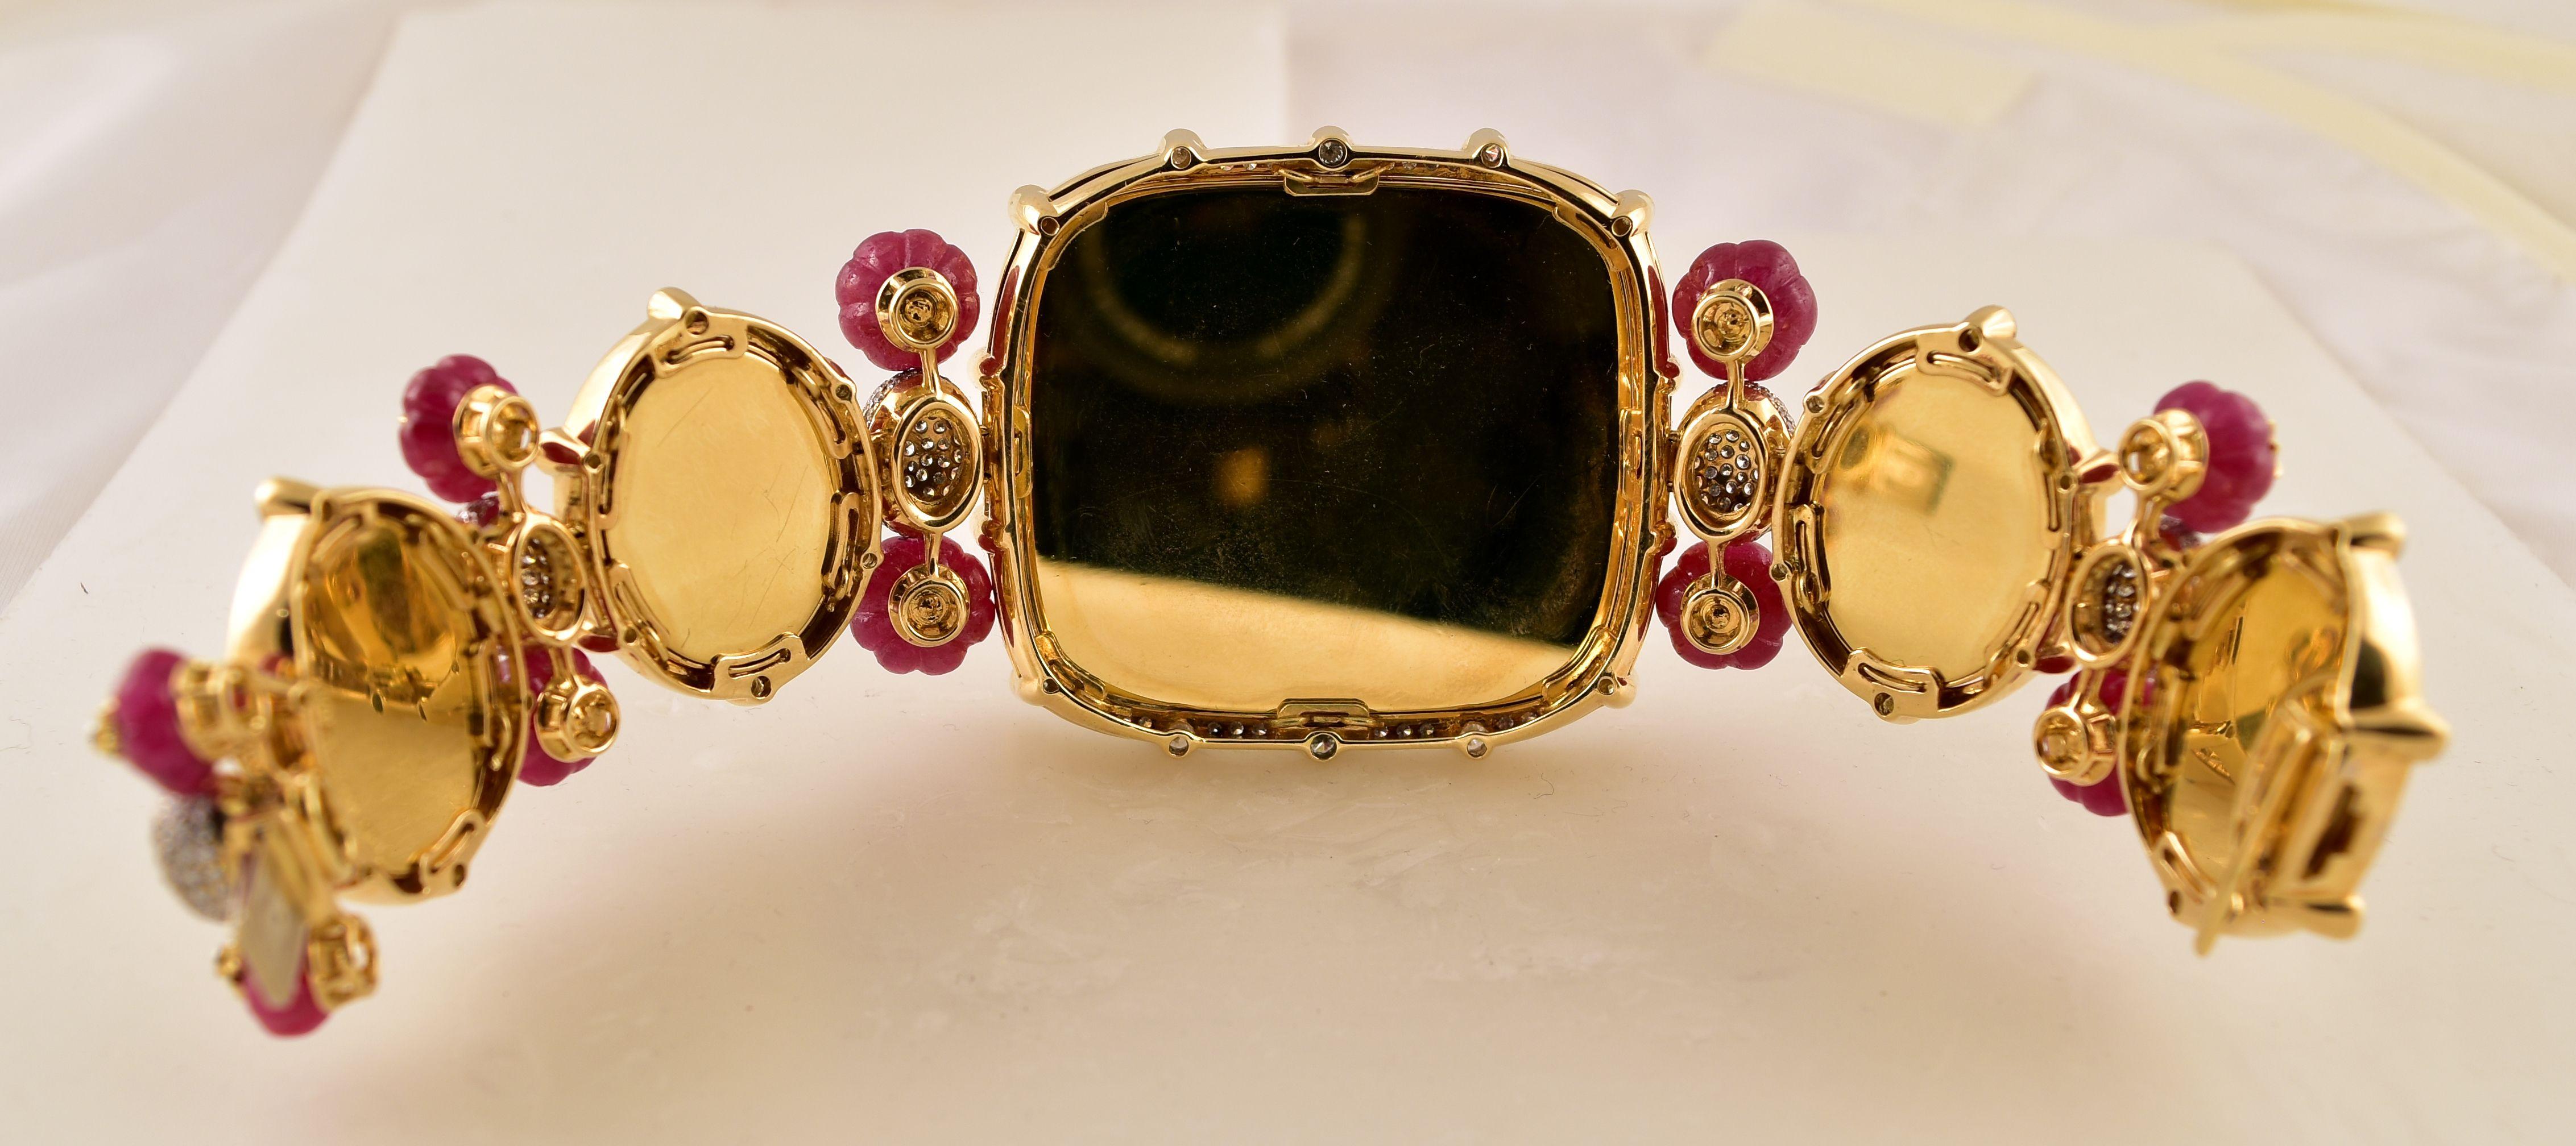 Magnificent! Elegant and Finely detailed 19th Century Hand painted Plaques featuring Indian Monuments, Diamond (app. 11.10 total Carat weight) and Fluted Ruby beads (app. 97.4 total Carat weight) Statement Bracelet. Hand crafted in 18k yellow Gold;